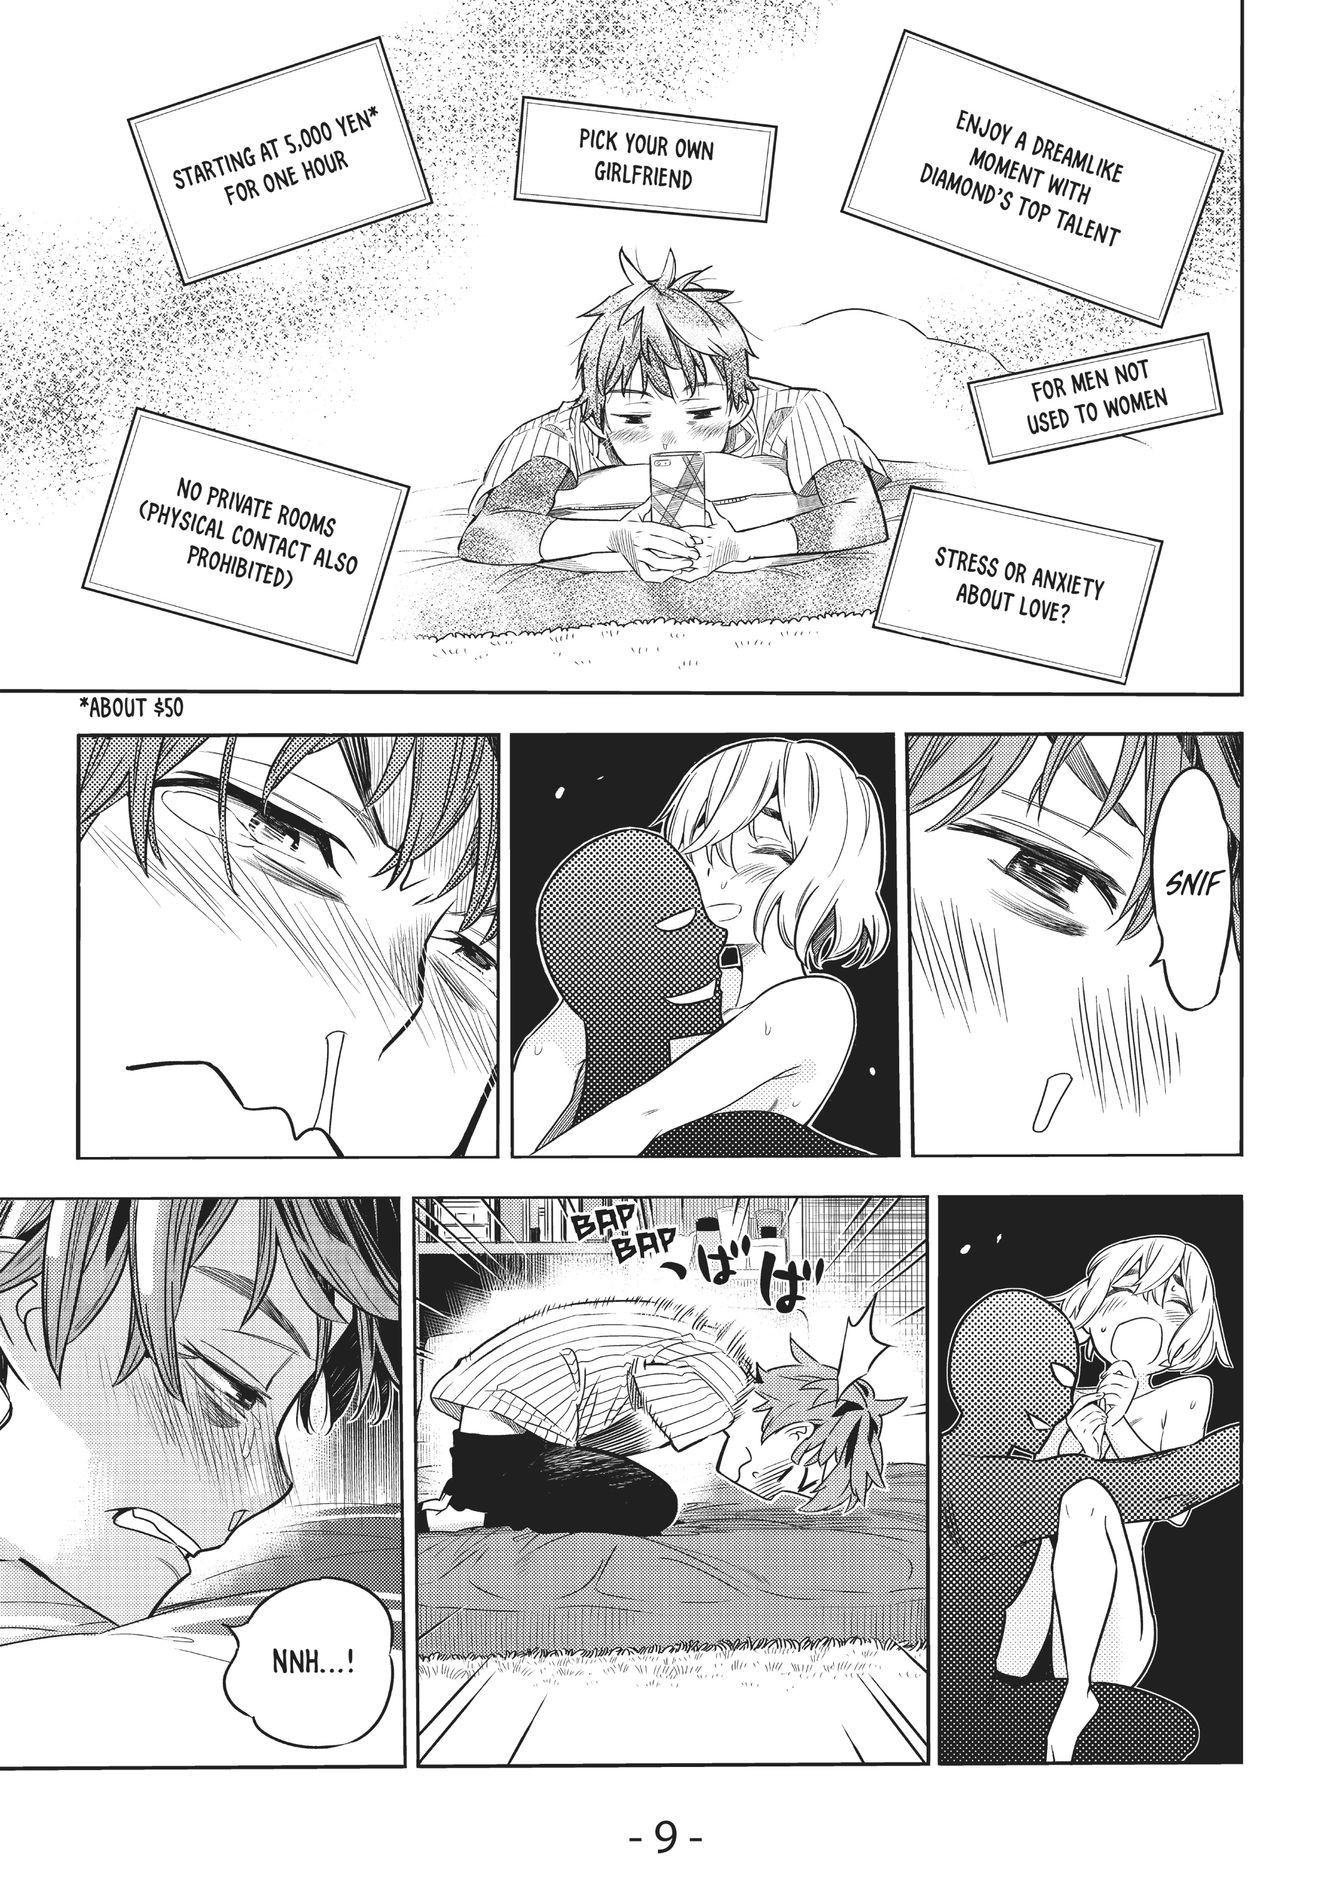 Rent-A-Girlfriend, Chapter 1 image 06